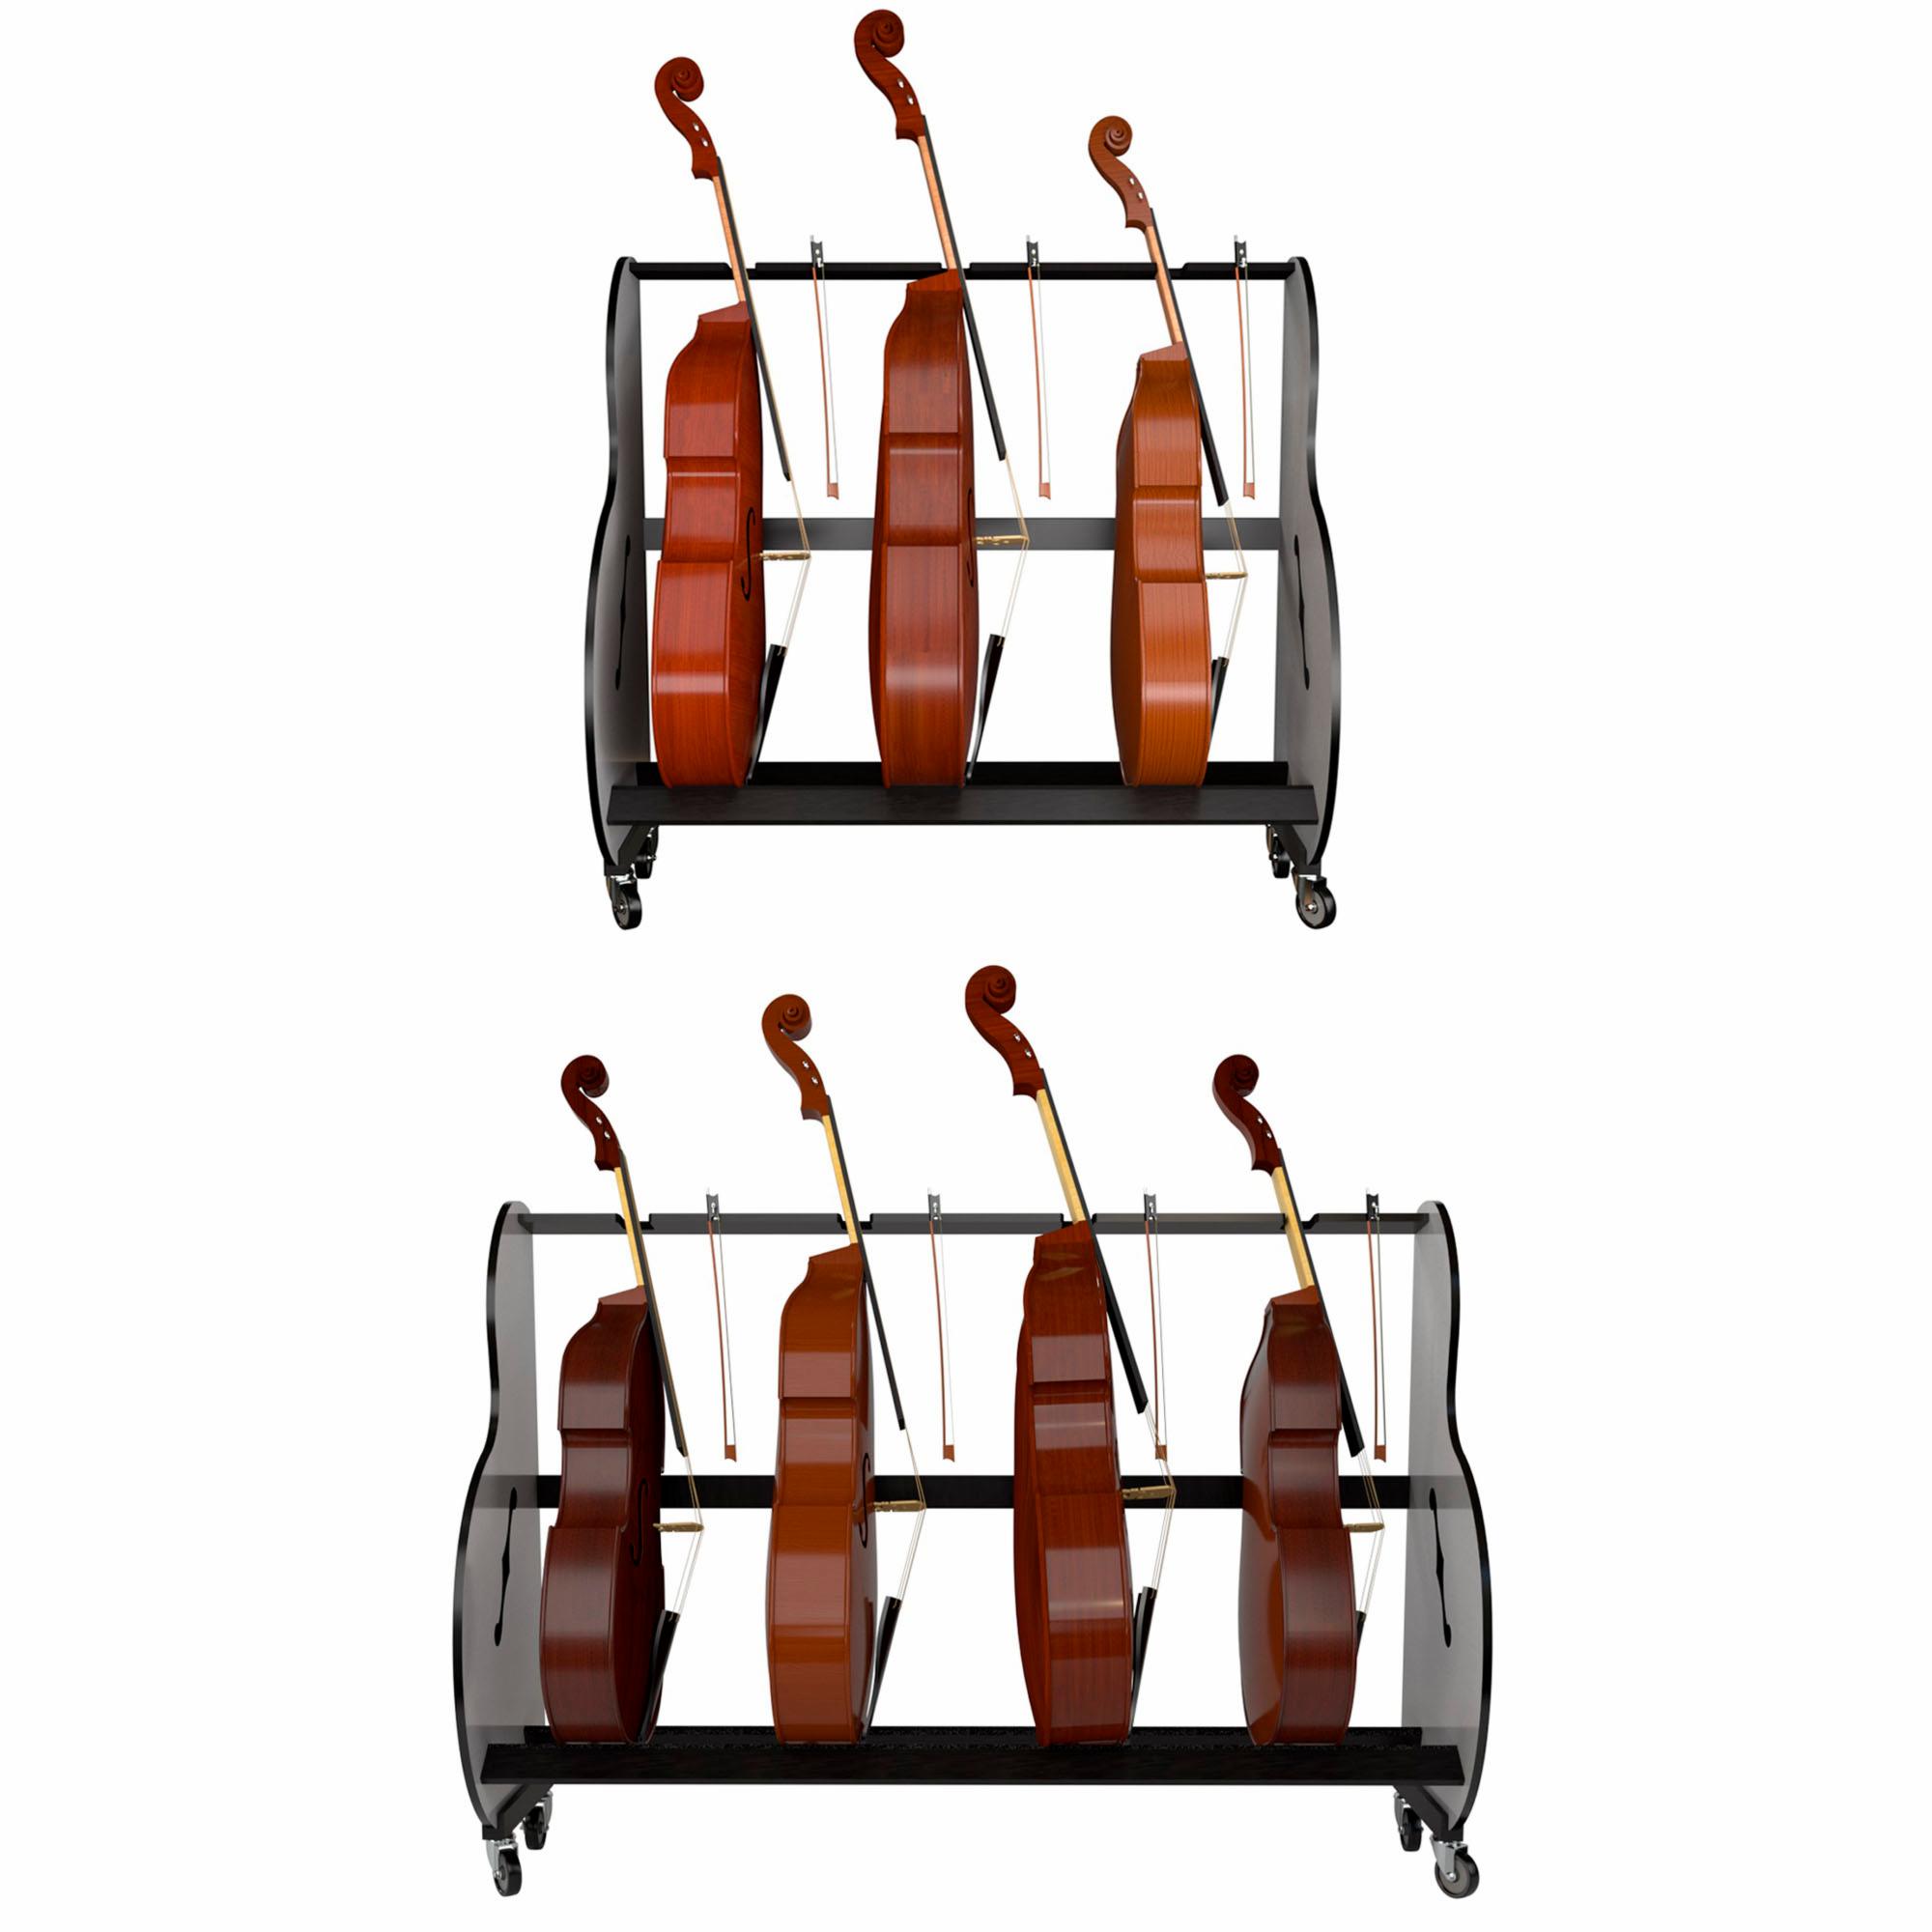 A&S Crafted Products Band Room Bass Rack Instrument Stand